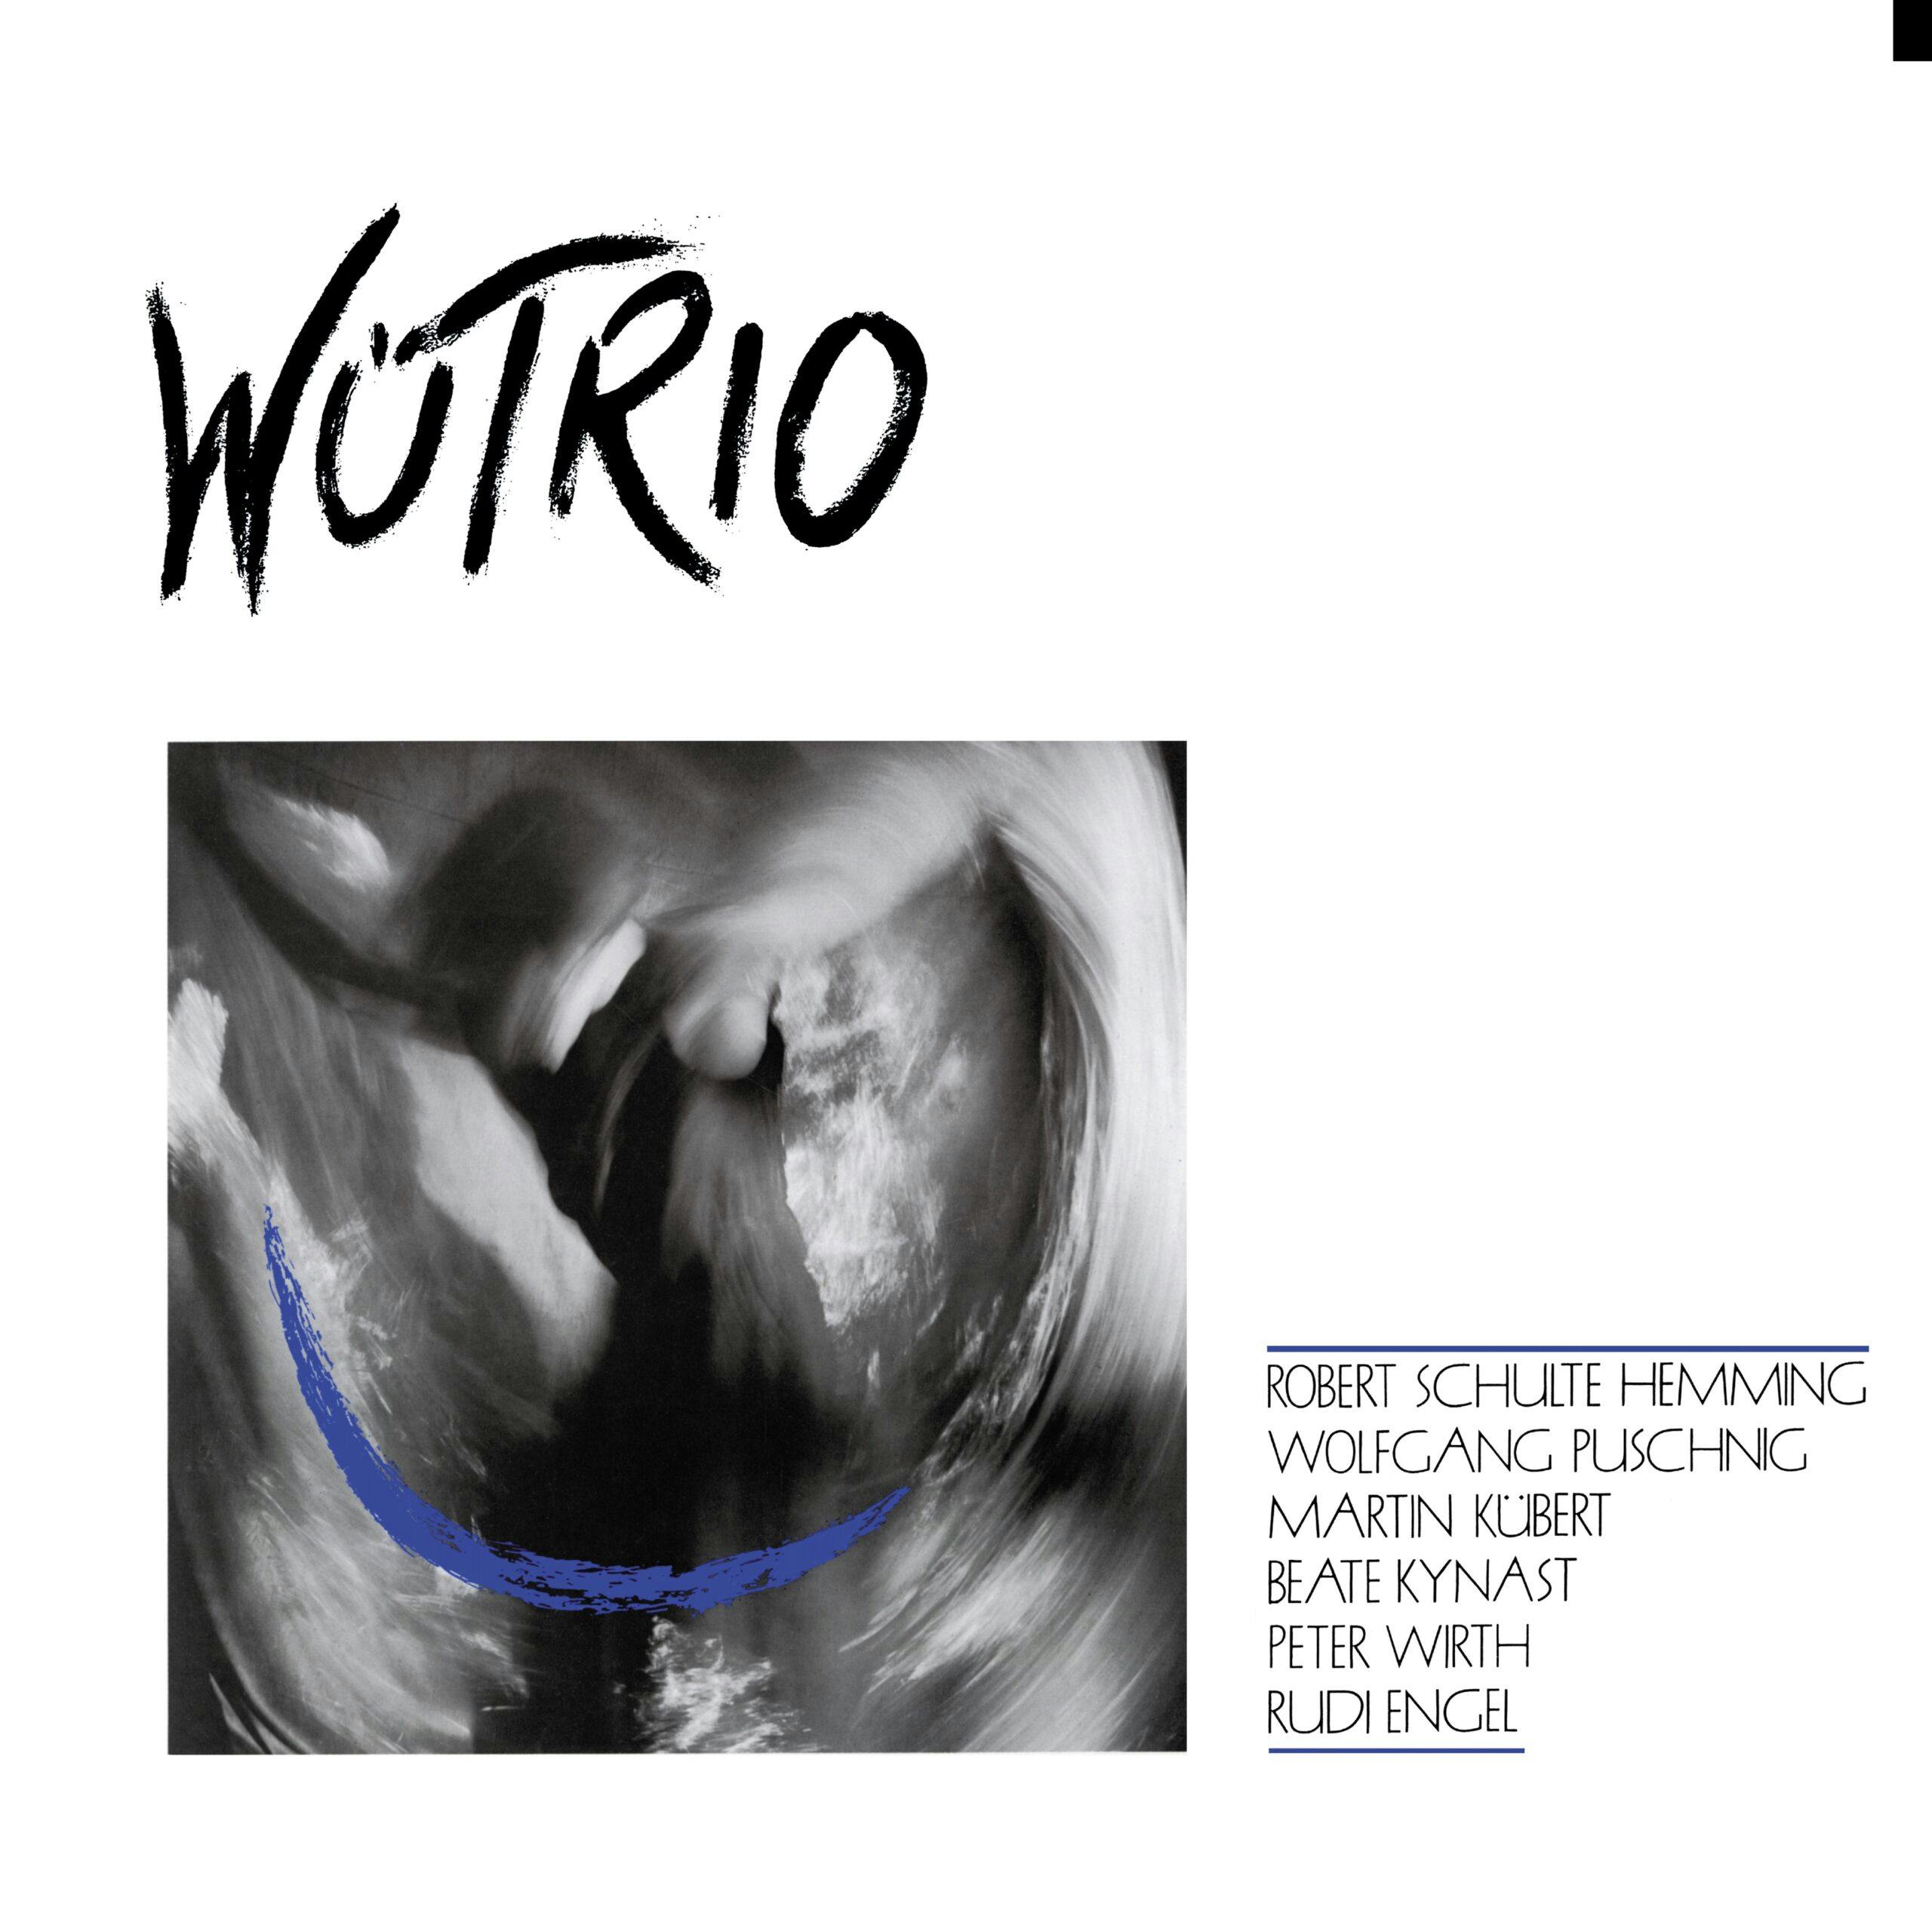 Wütrio is the first in a series of re-issue albums curated by legendary German DJ, producer and rare vinyl collector Rainer Trueby. 'Wütrio' is the critically-acclaimed album first released in 1987 on the Bremen based label, Thein Records . A label started by Friedrich Thein whose musical pedigree includes links to the world class and world famous Thein Brass instrument makers and retailers.